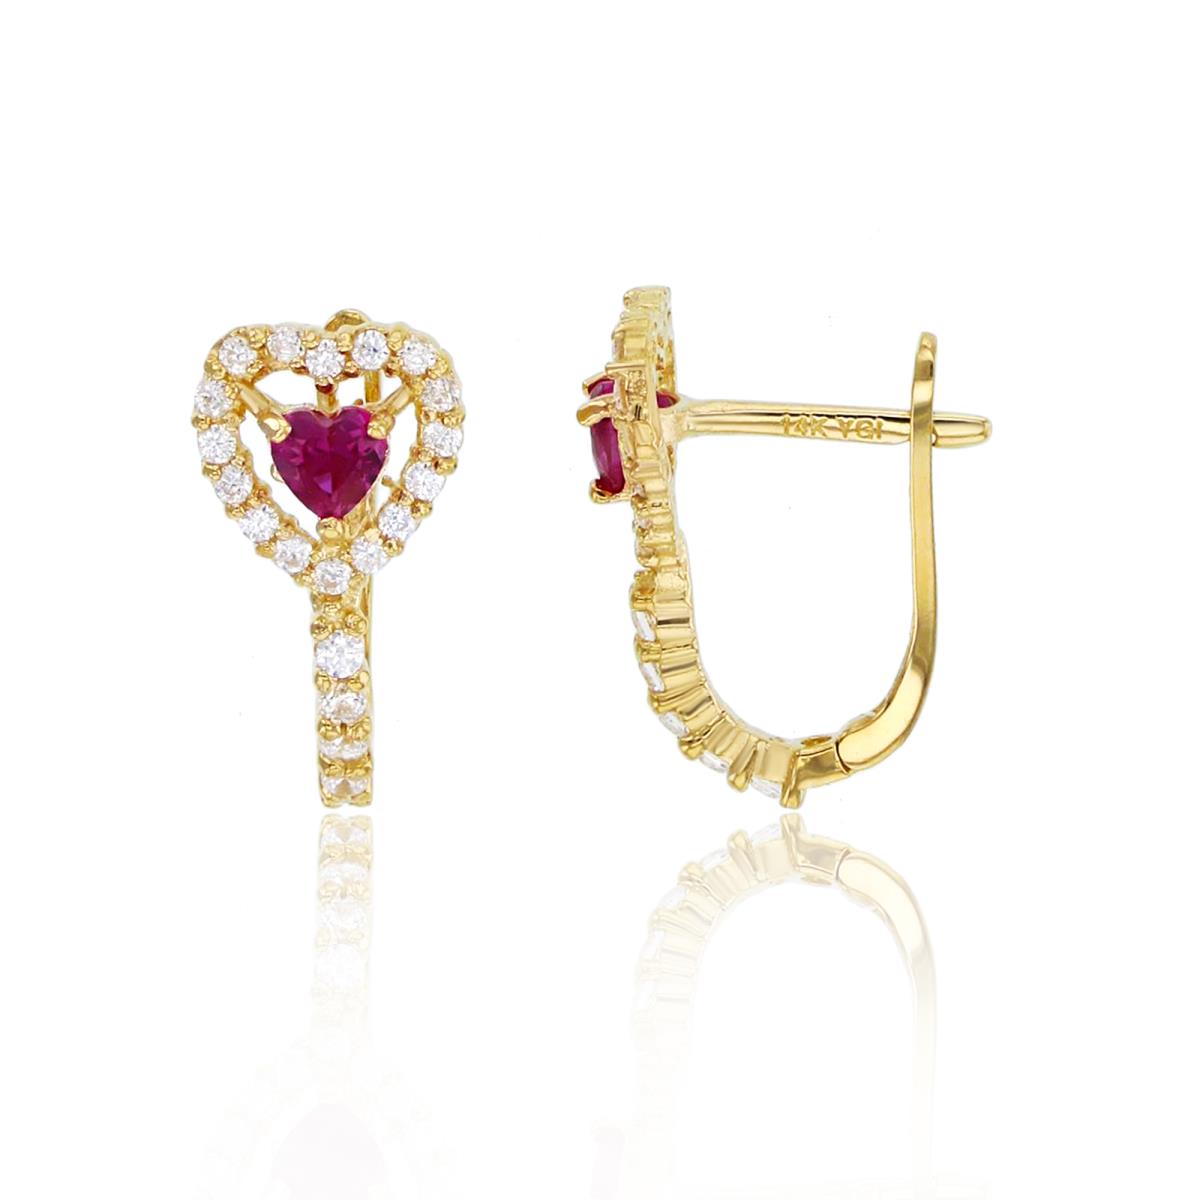 14K Yellow Gold Rnd White & 3mm HS Ruby CZ Heart Earrings with Latch Backs